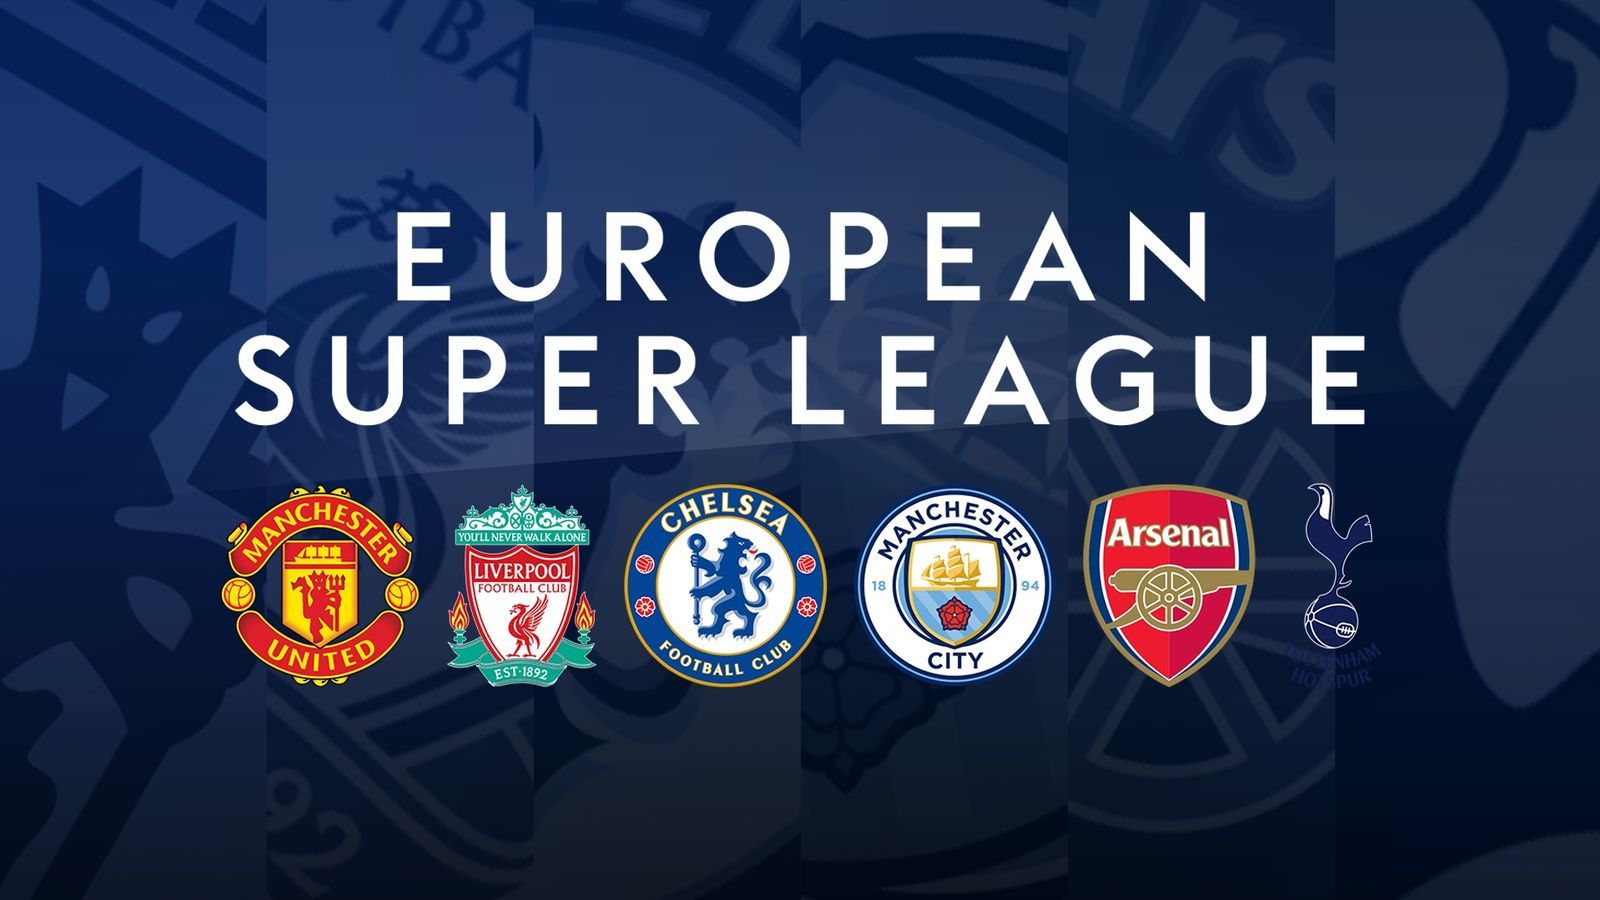 The Premier League's big-six clubs - Manchester United, Manchester City, Liverpool, Arsenal, Chelsea and Tottenham - are all involved